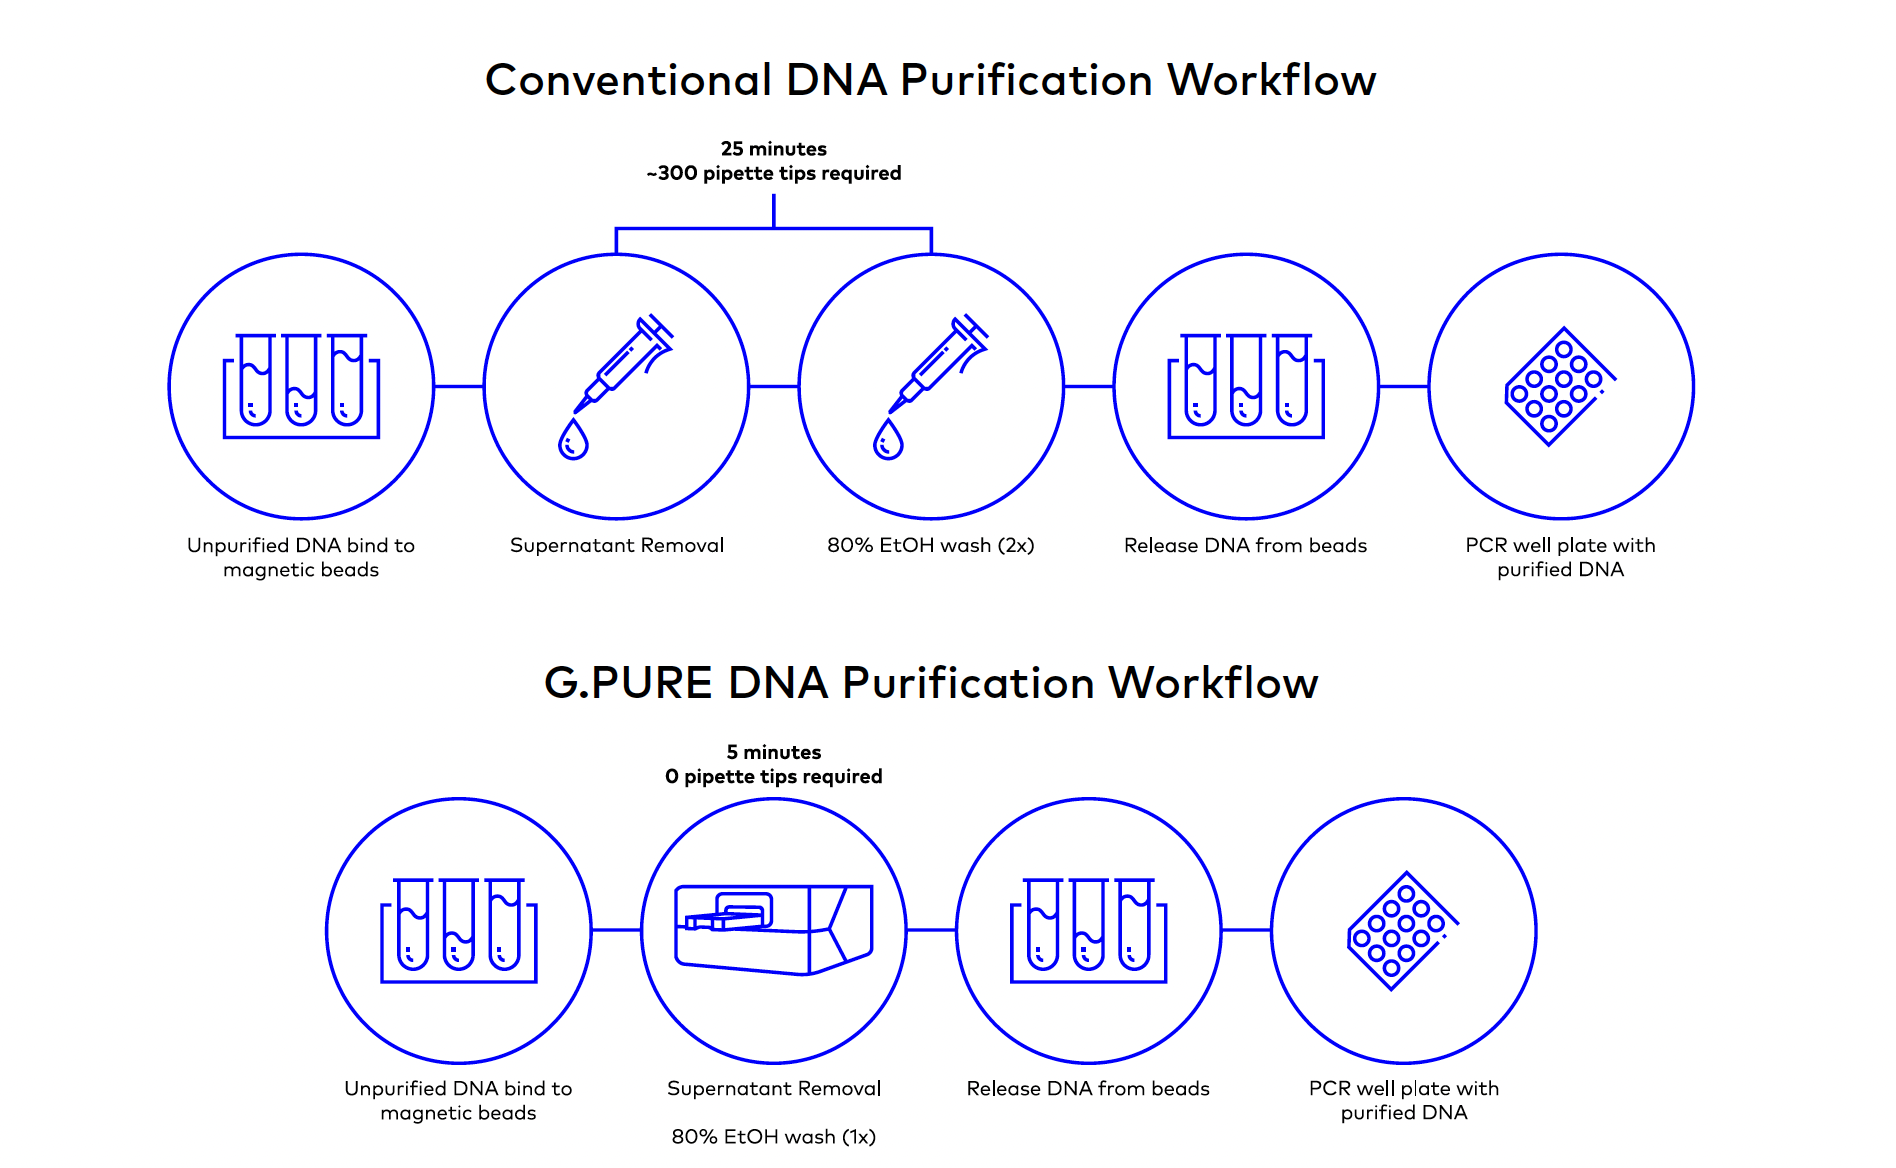 The G.PURE provides a fast and automated workflow for bead-based DNA purification.